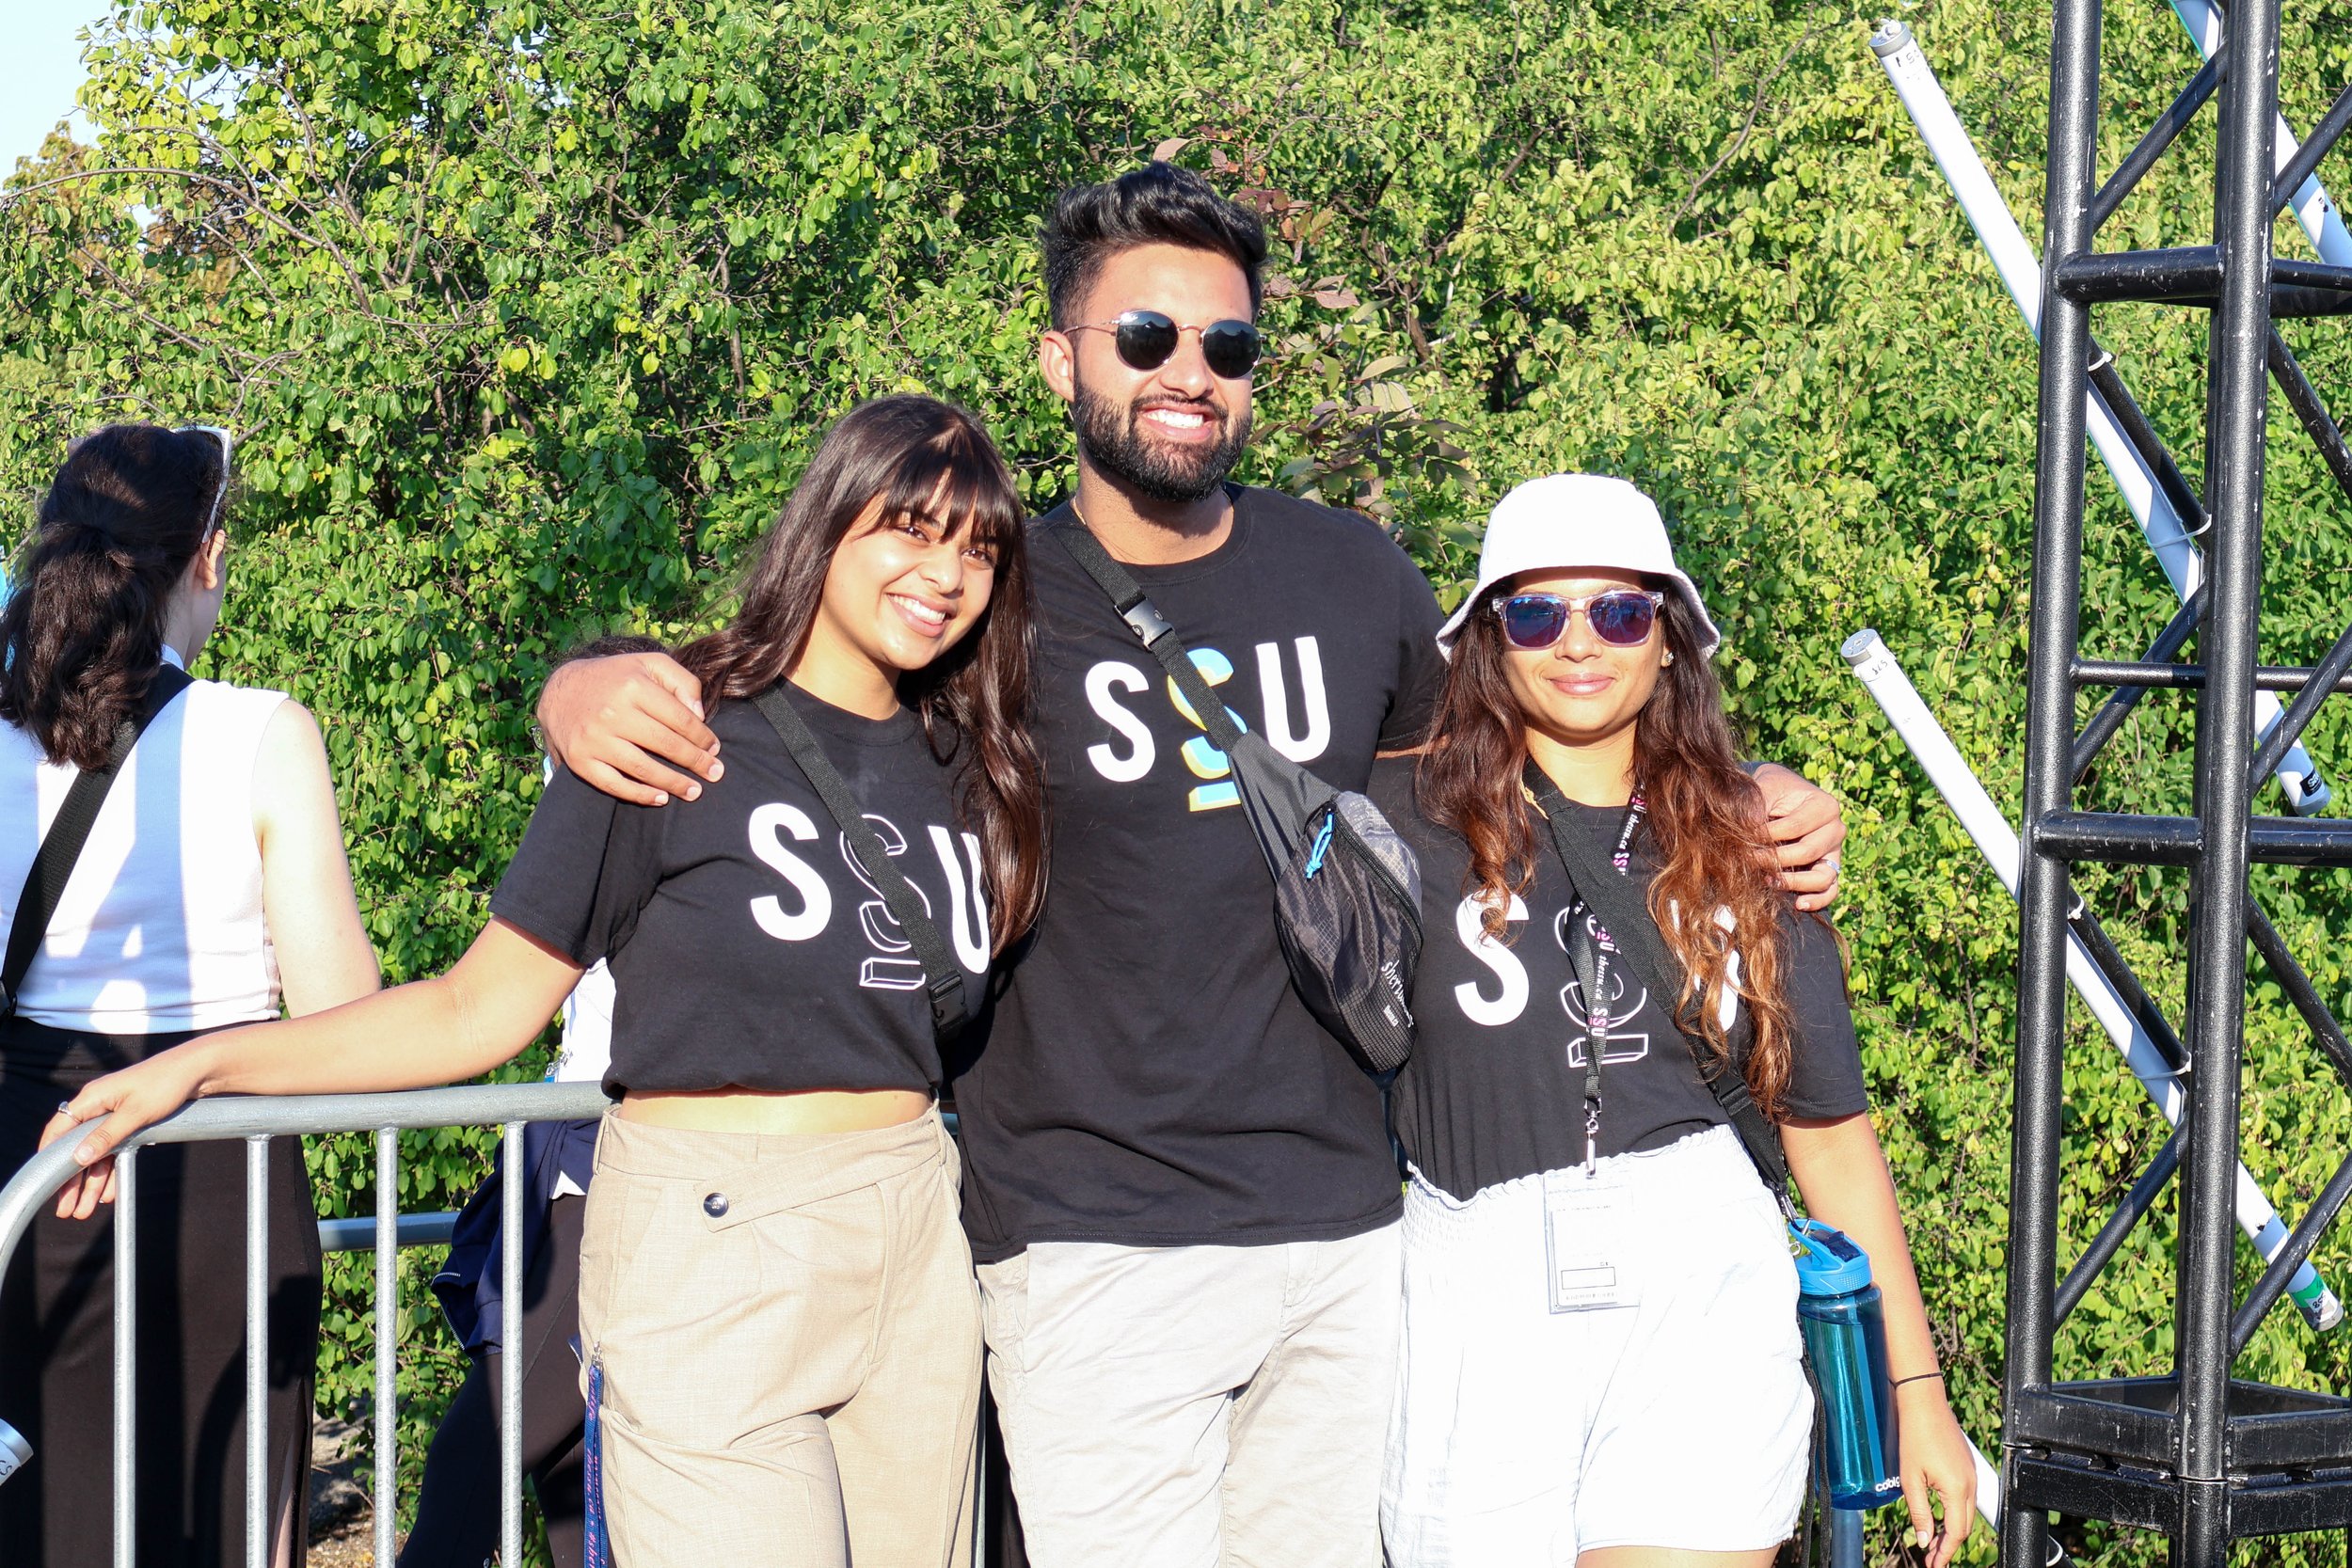  Three students standing outside an event gate, smiling in black t-shirts with the SSU logo on the front.  